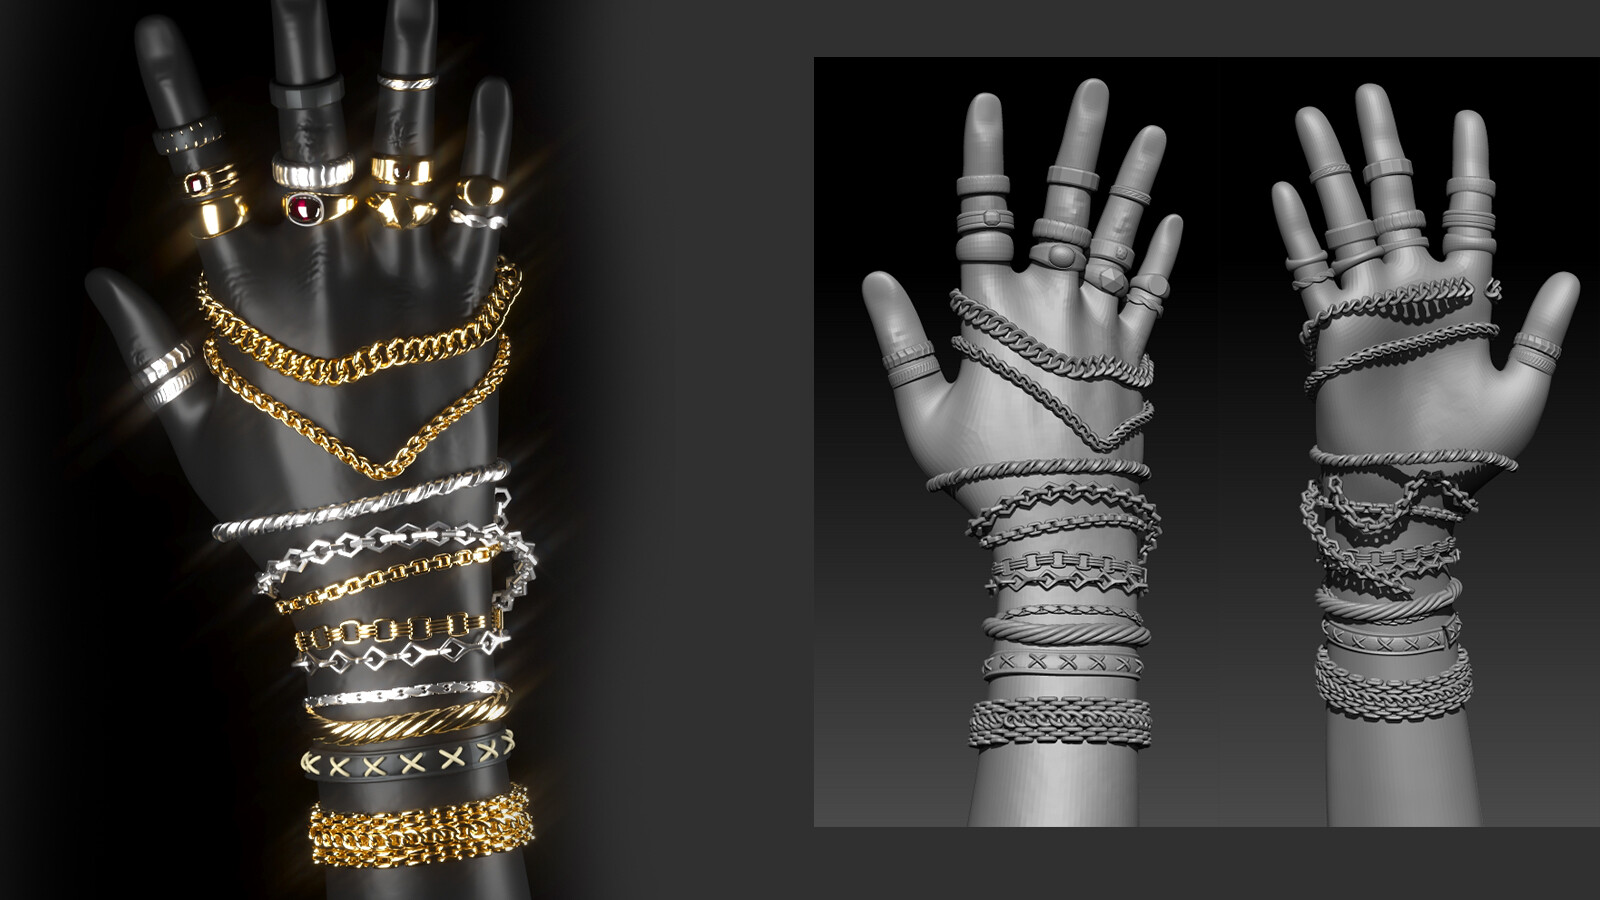 ArtStation - High Jewelry Collection Vol1-4K